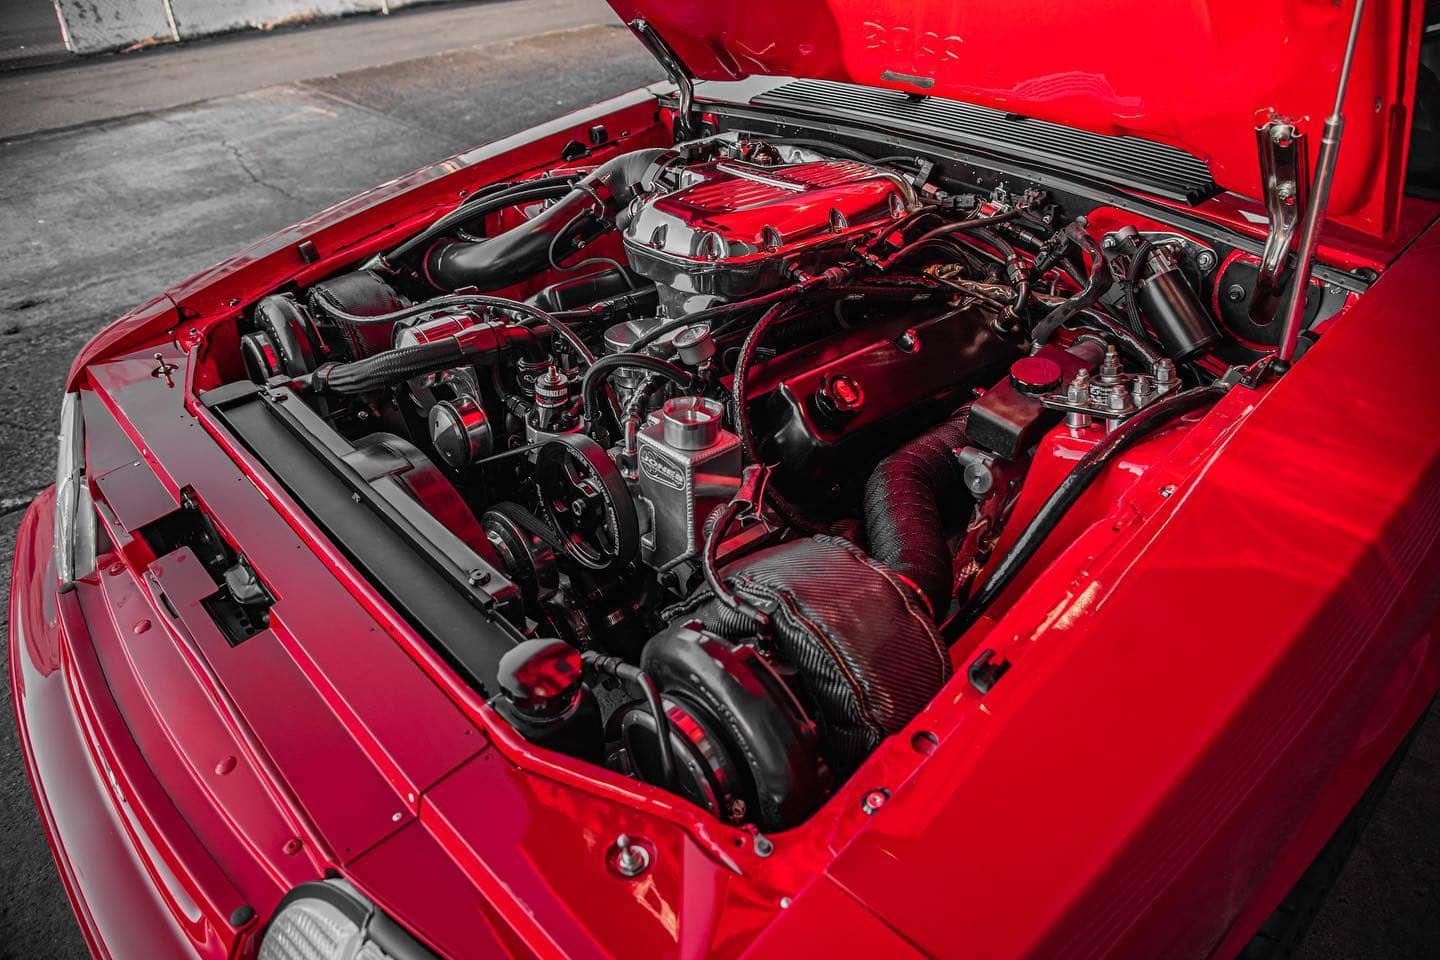 427w Dart SHP Block 9.5:1 Compression and Borg Warner S366 Twin Turbo on Foxbody Mustang